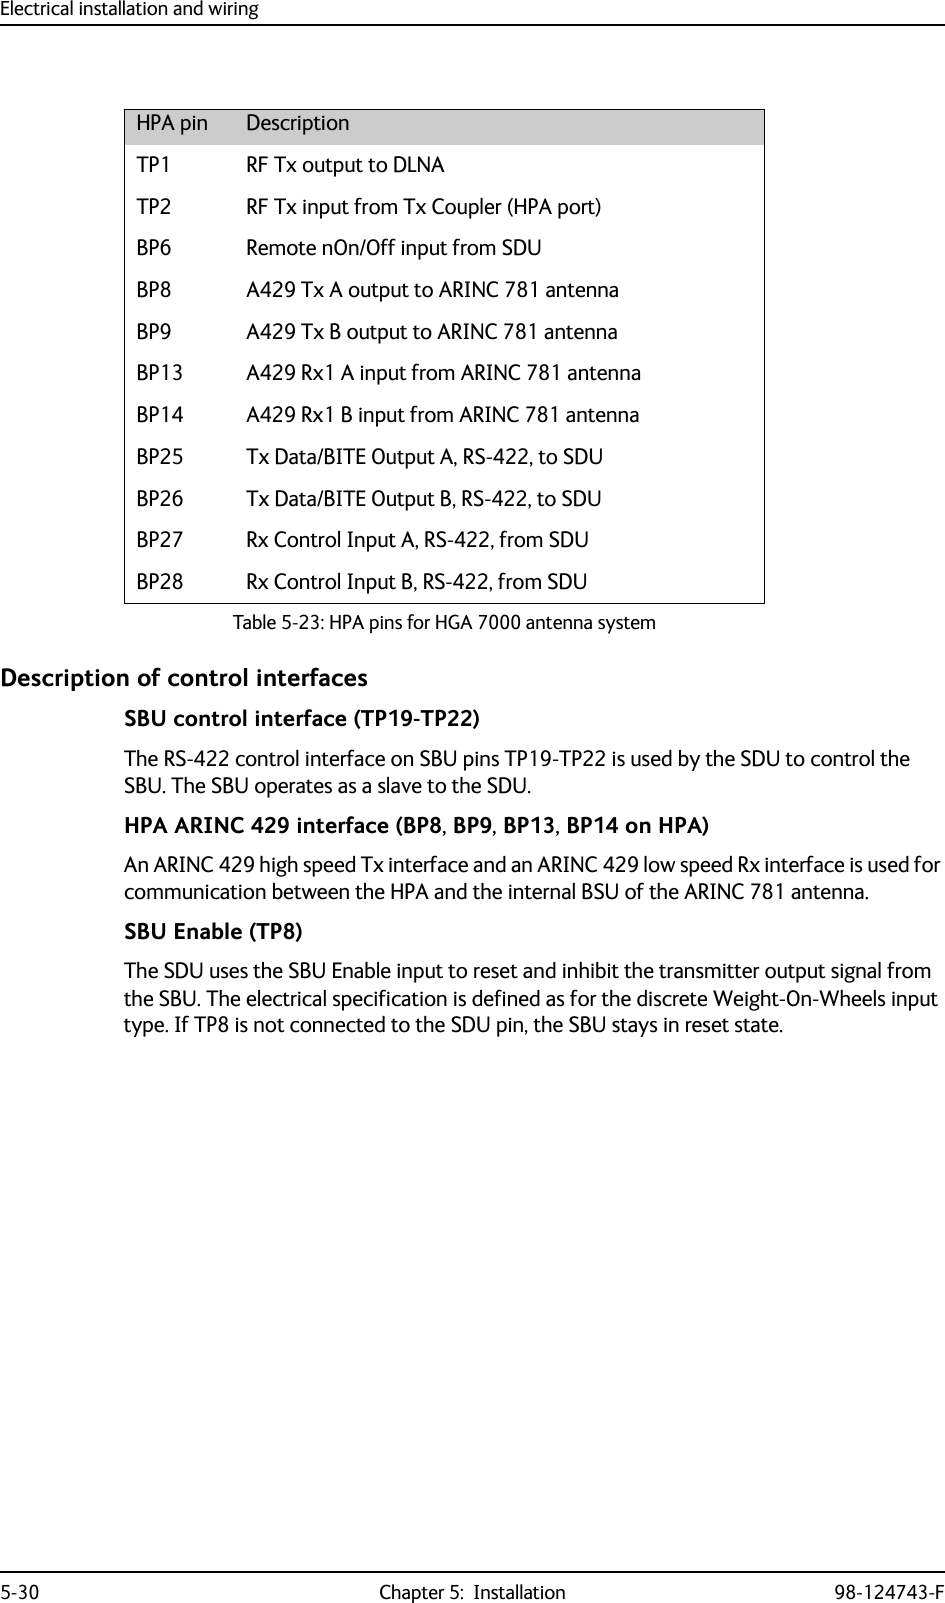 Electrical installation and wiring5-30 Chapter 5:  Installation 98-124743-FDescription of control interfacesSBU control interface (TP19-TP22)The RS-422 control interface on SBU pins TP19-TP22 is used by the SDU to control the SBU. The SBU operates as a slave to the SDU. HPA ARINC 429 interface (BP8, BP9, BP13, BP14 on HPA)An ARINC 429 high speed Tx interface and an ARINC 429 low speed Rx interface is used for communication between the HPA and the internal BSU of the ARINC 781 antenna.SBU Enable (TP8)The SDU uses the SBU Enable input to reset and inhibit the transmitter output signal from the SBU. The electrical specification is defined as for the discrete Weight-On-Wheels input type. If TP8 is not connected to the SDU pin, the SBU stays in reset state.HPA pin DescriptionTP1 RF Tx output to DLNATP2 RF Tx input from Tx Coupler (HPA port)BP6 Remote nOn/Off input from SDUBP8 A429 Tx A output to ARINC 781 antennaBP9 A429 Tx B output to ARINC 781 antennaBP13 A429 Rx1 A input from ARINC 781 antennaBP14 A429 Rx1 B input from ARINC 781 antennaBP25 Tx Data/BITE Output A, RS-422, to SDUBP26 Tx Data/BITE Output B, RS-422, to SDUBP27 Rx Control Input A, RS-422, from SDUBP28 Rx Control Input B, RS-422, from SDUTable 5-23: HPA pins for HGA 7000 antenna system